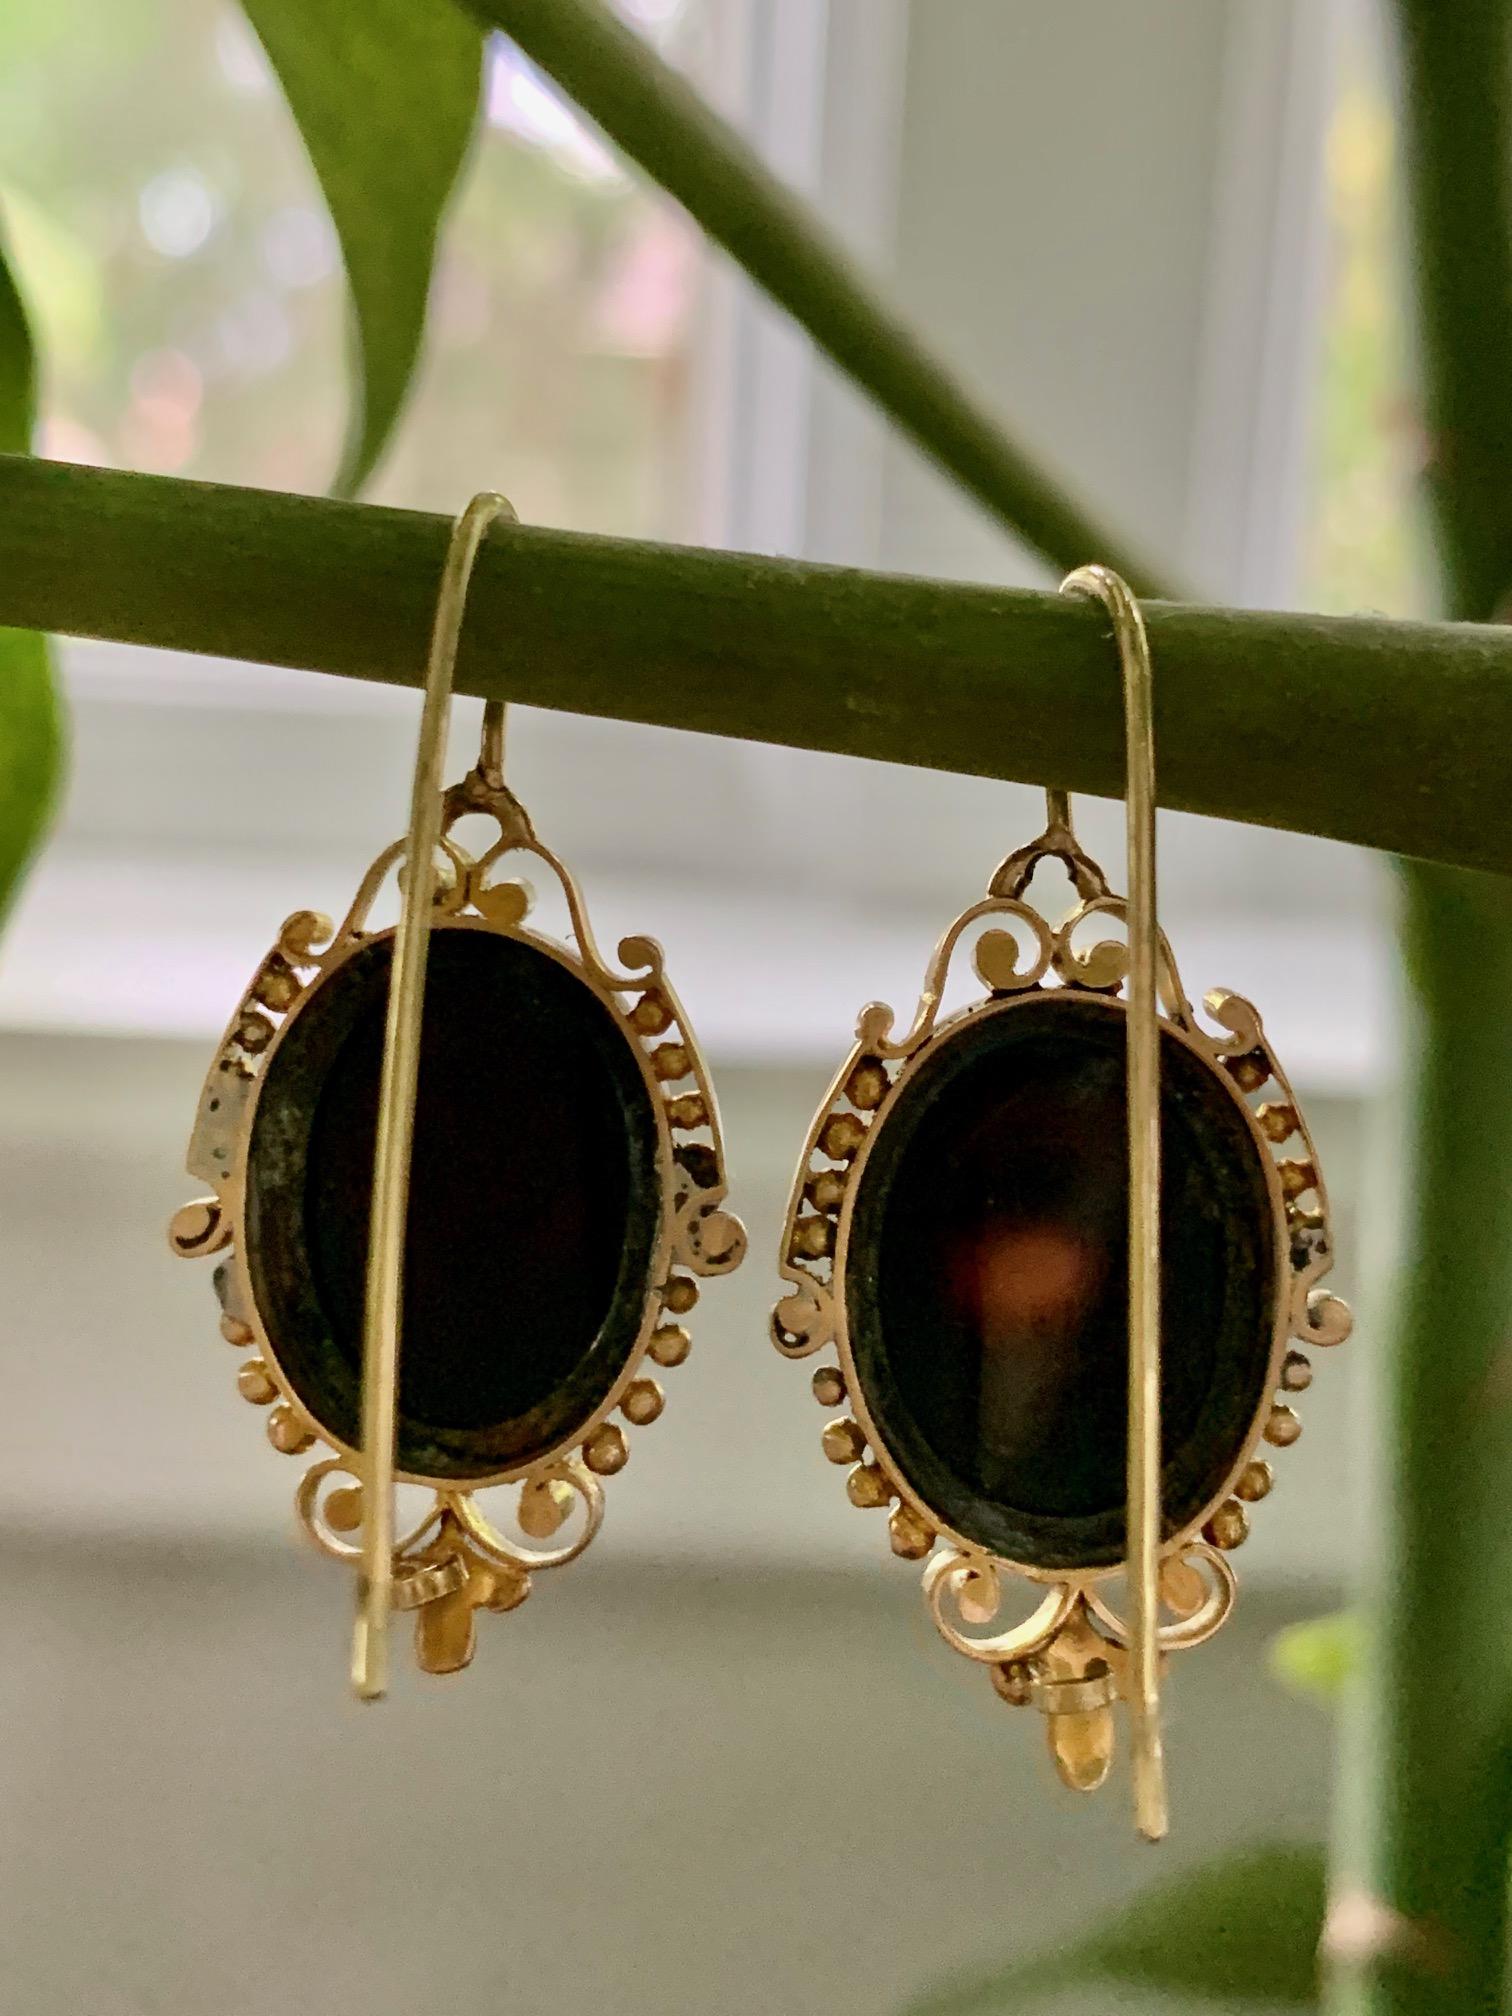 These Victorian Cameo earrings are carved in stone and set in 14k yellow Gold.  they are for pierced ears using a shepherd's hook ear wire.

They measure 27 x 18mm.

Weight 10.6 grams